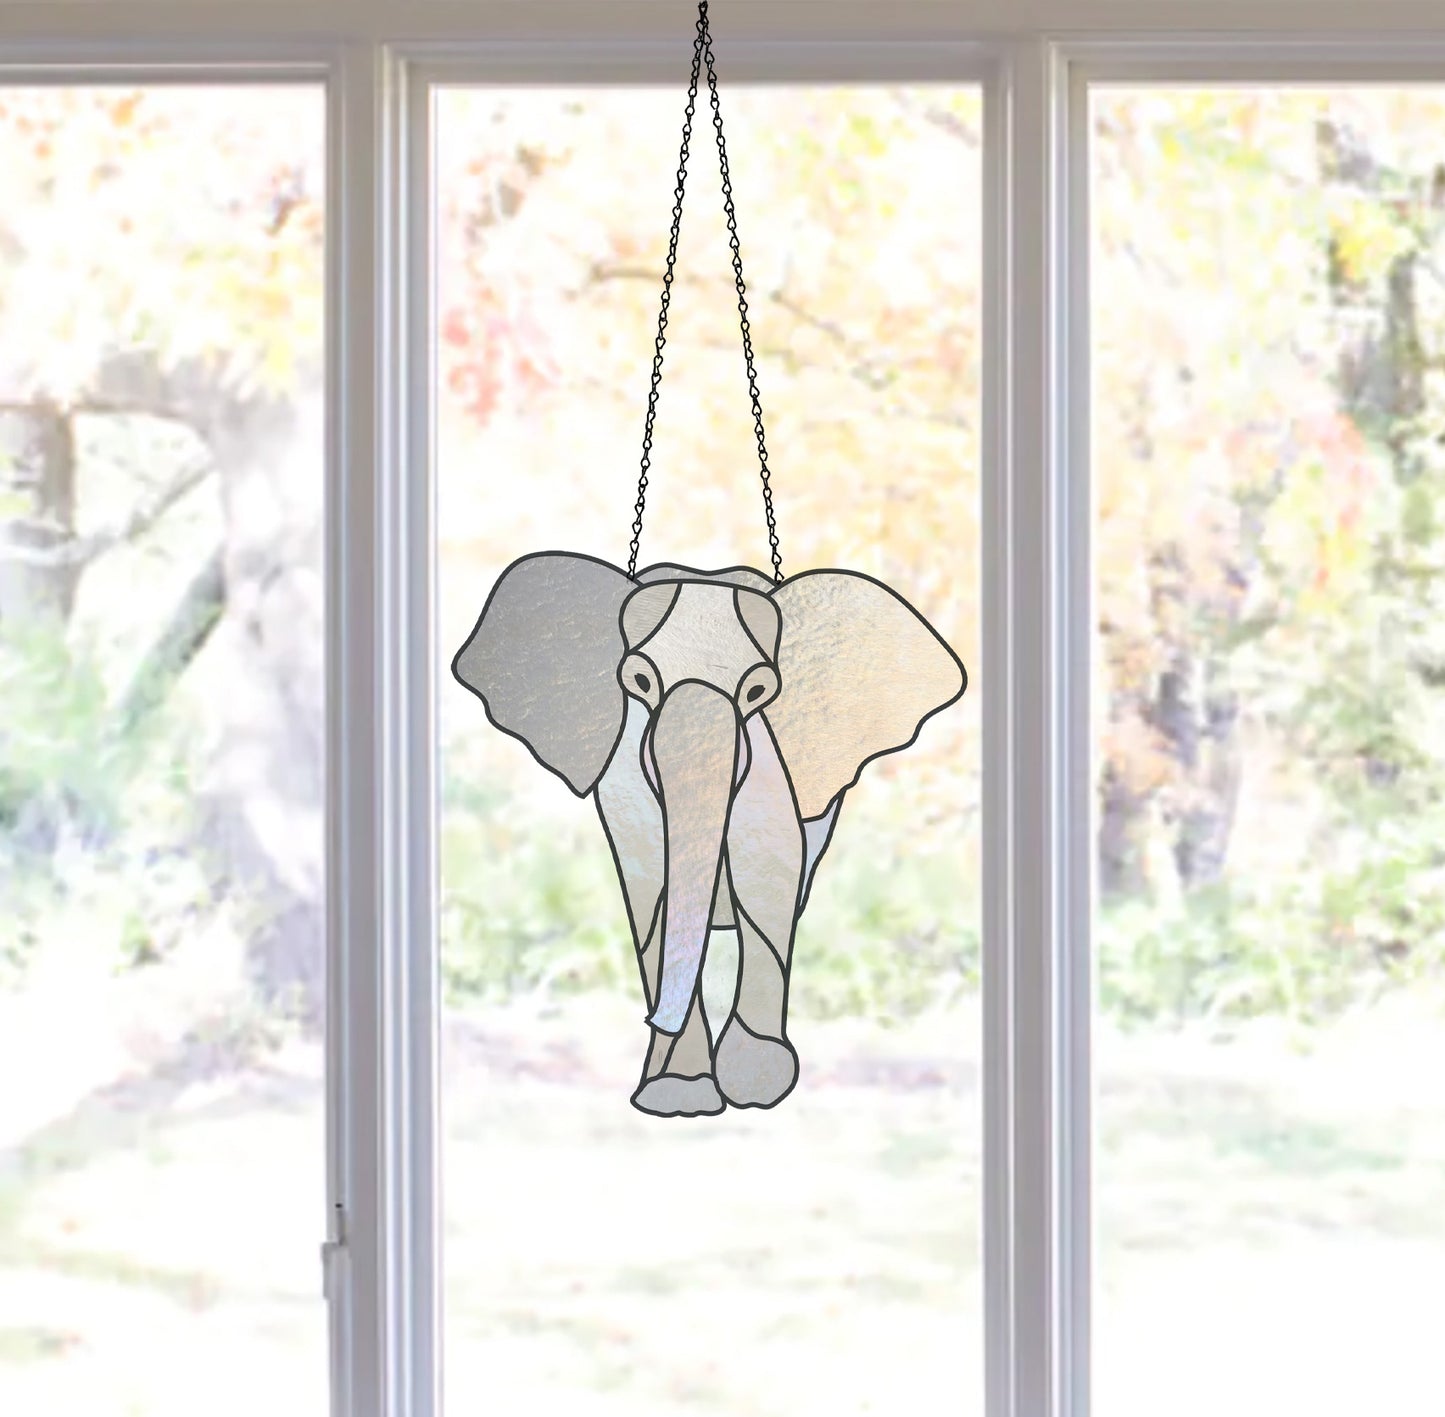 Elephant Stained Glass Pattern